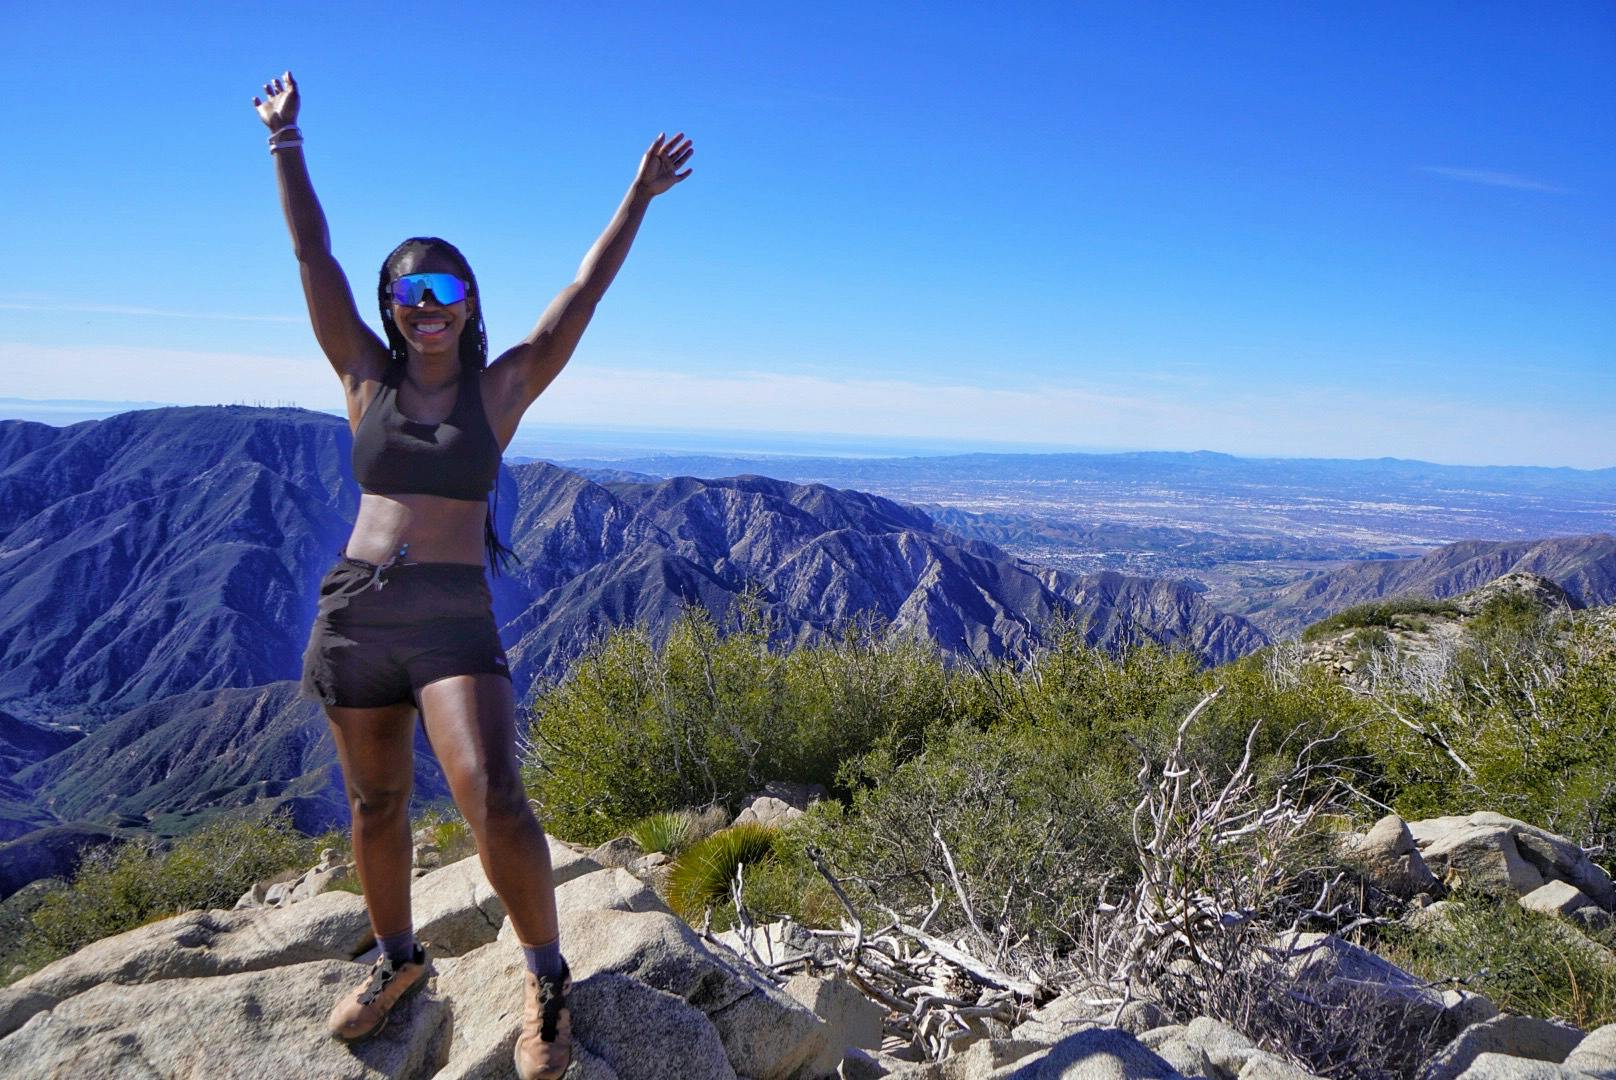 Hiker celebrating at Condor Peak in the San Gabriel Mountains Los Angeles County 